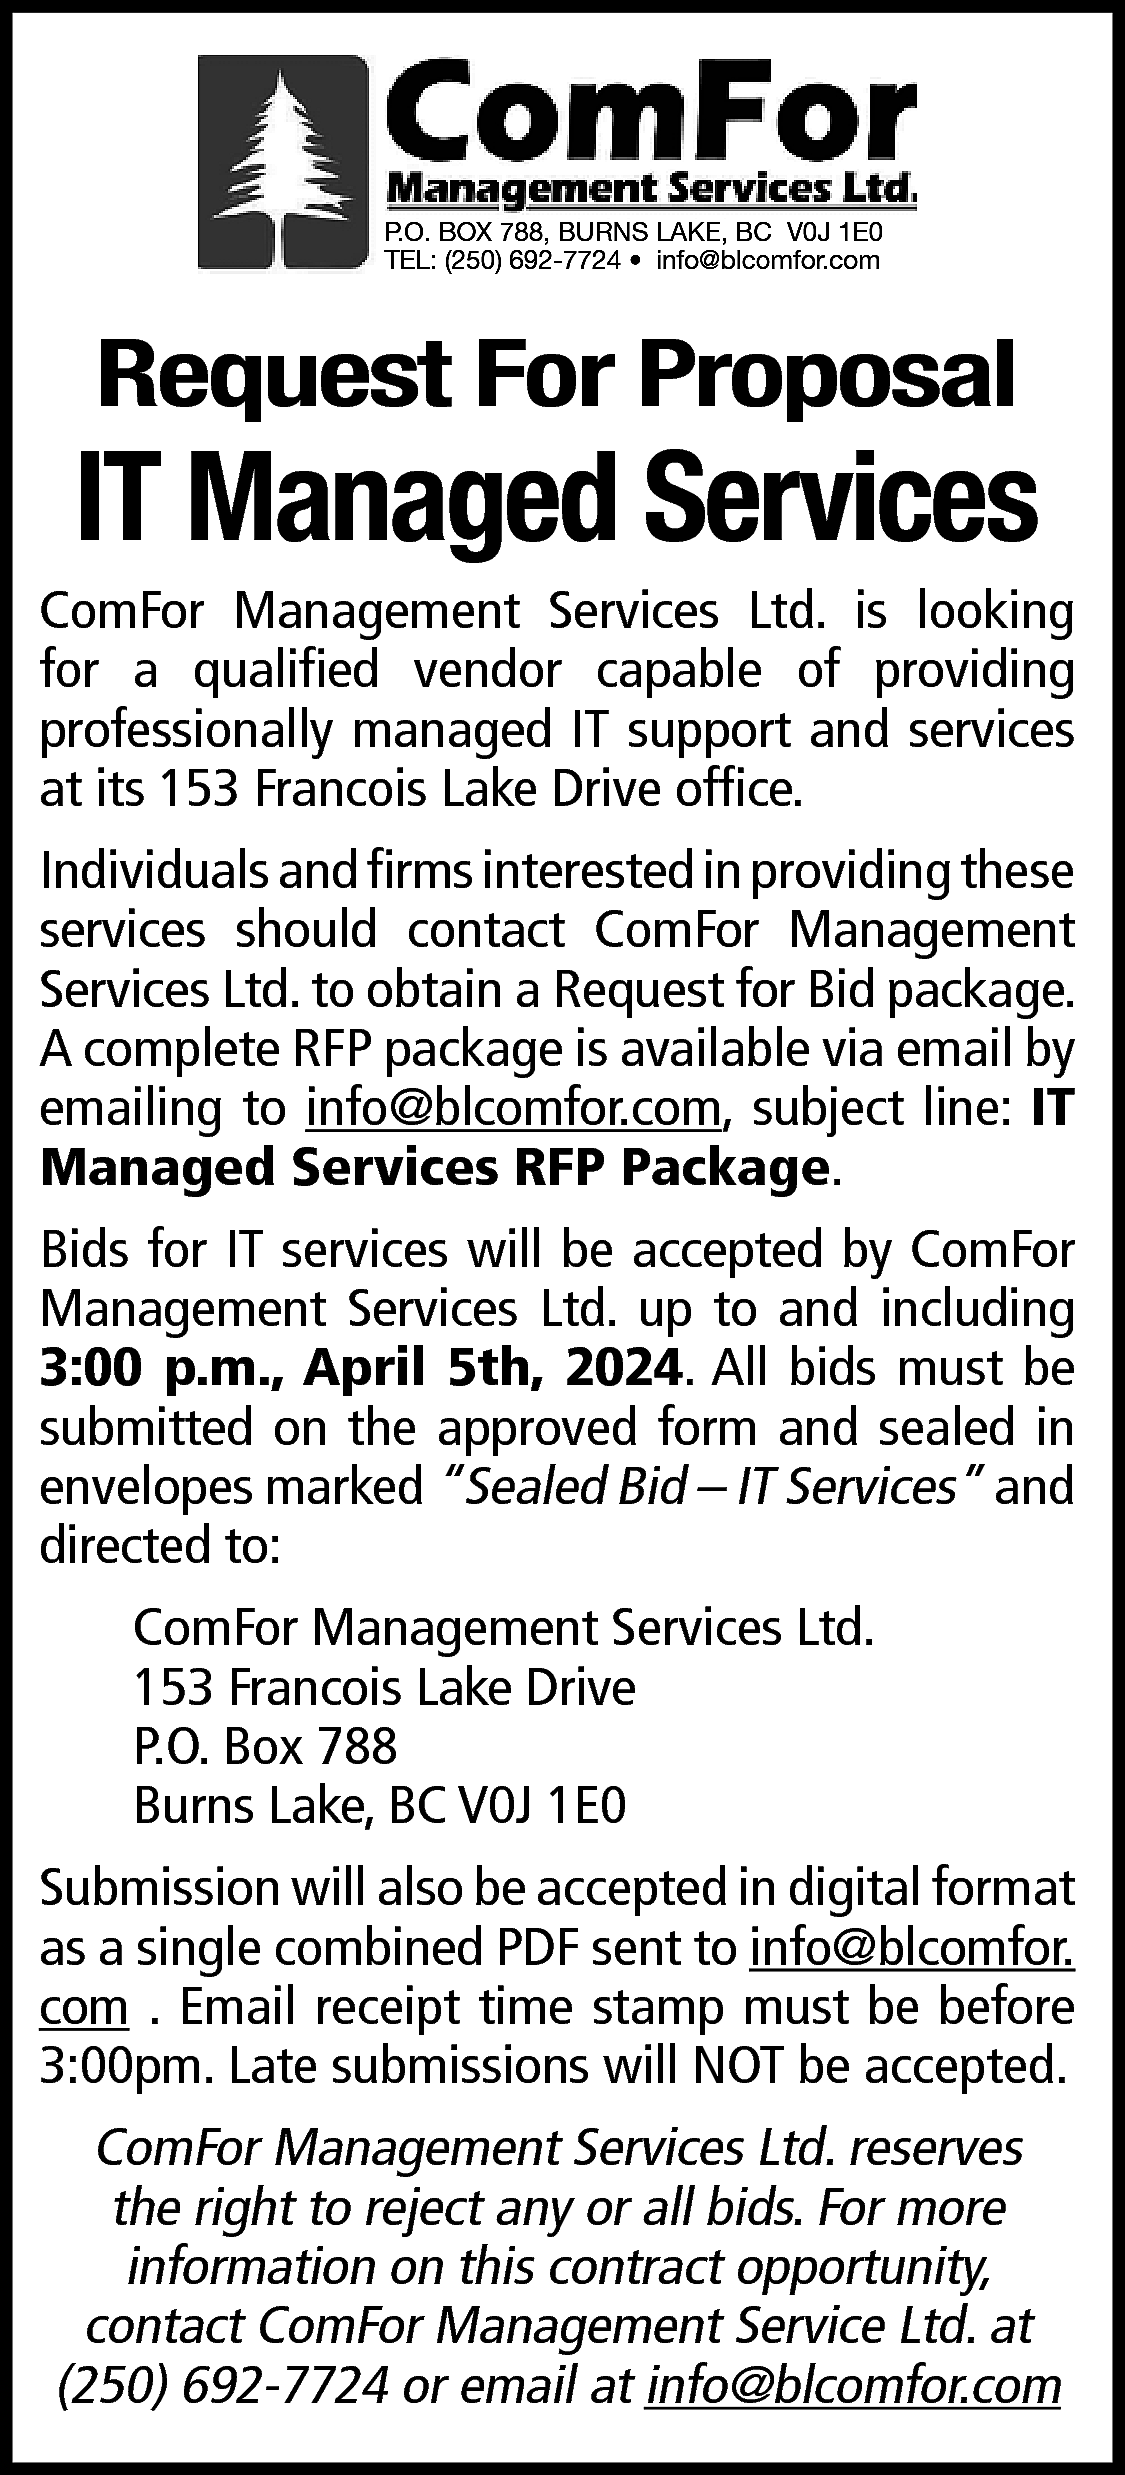 P.O. BOX 788, BURNS LAKE,  P.O. BOX 788, BURNS LAKE, BC V0J 1E0  TEL: (250) 692-7724 • info@blcomfor.com    Request For Proposal    IT Managed Services    ComFor Management Services Ltd. is looking  for a qualified vendor capable of providing  professionally managed IT support and services  at its 153 Francois Lake Drive office.  Individuals and firms interested in providing these  services should contact ComFor Management  Services Ltd. to obtain a Request for Bid package.  A complete RFP package is available via email by  emailing to info@blcomfor.com, subject line: IT  Managed Services RFP Package.  Bids for IT services will be accepted by ComFor  Management Services Ltd. up to and including  3:00 p.m., April 5th, 2024. All bids must be  submitted on the approved form and sealed in  envelopes marked “Sealed Bid – IT Services” and  directed to:  ComFor Management Services Ltd.  153 Francois Lake Drive  P.O. Box 788  Burns Lake, BC V0J 1E0  Submission will also be accepted in digital format  as a single combined PDF sent to info@blcomfor.  com . Email receipt time stamp must be before  3:00pm. Late submissions will NOT be accepted.    ComFor Management Services Ltd. reserves  the right to reject any or all bids. For more  information on this contract opportunity,  contact ComFor Management Service Ltd. at  (250) 692-7724 or email at info@blcomfor.com    